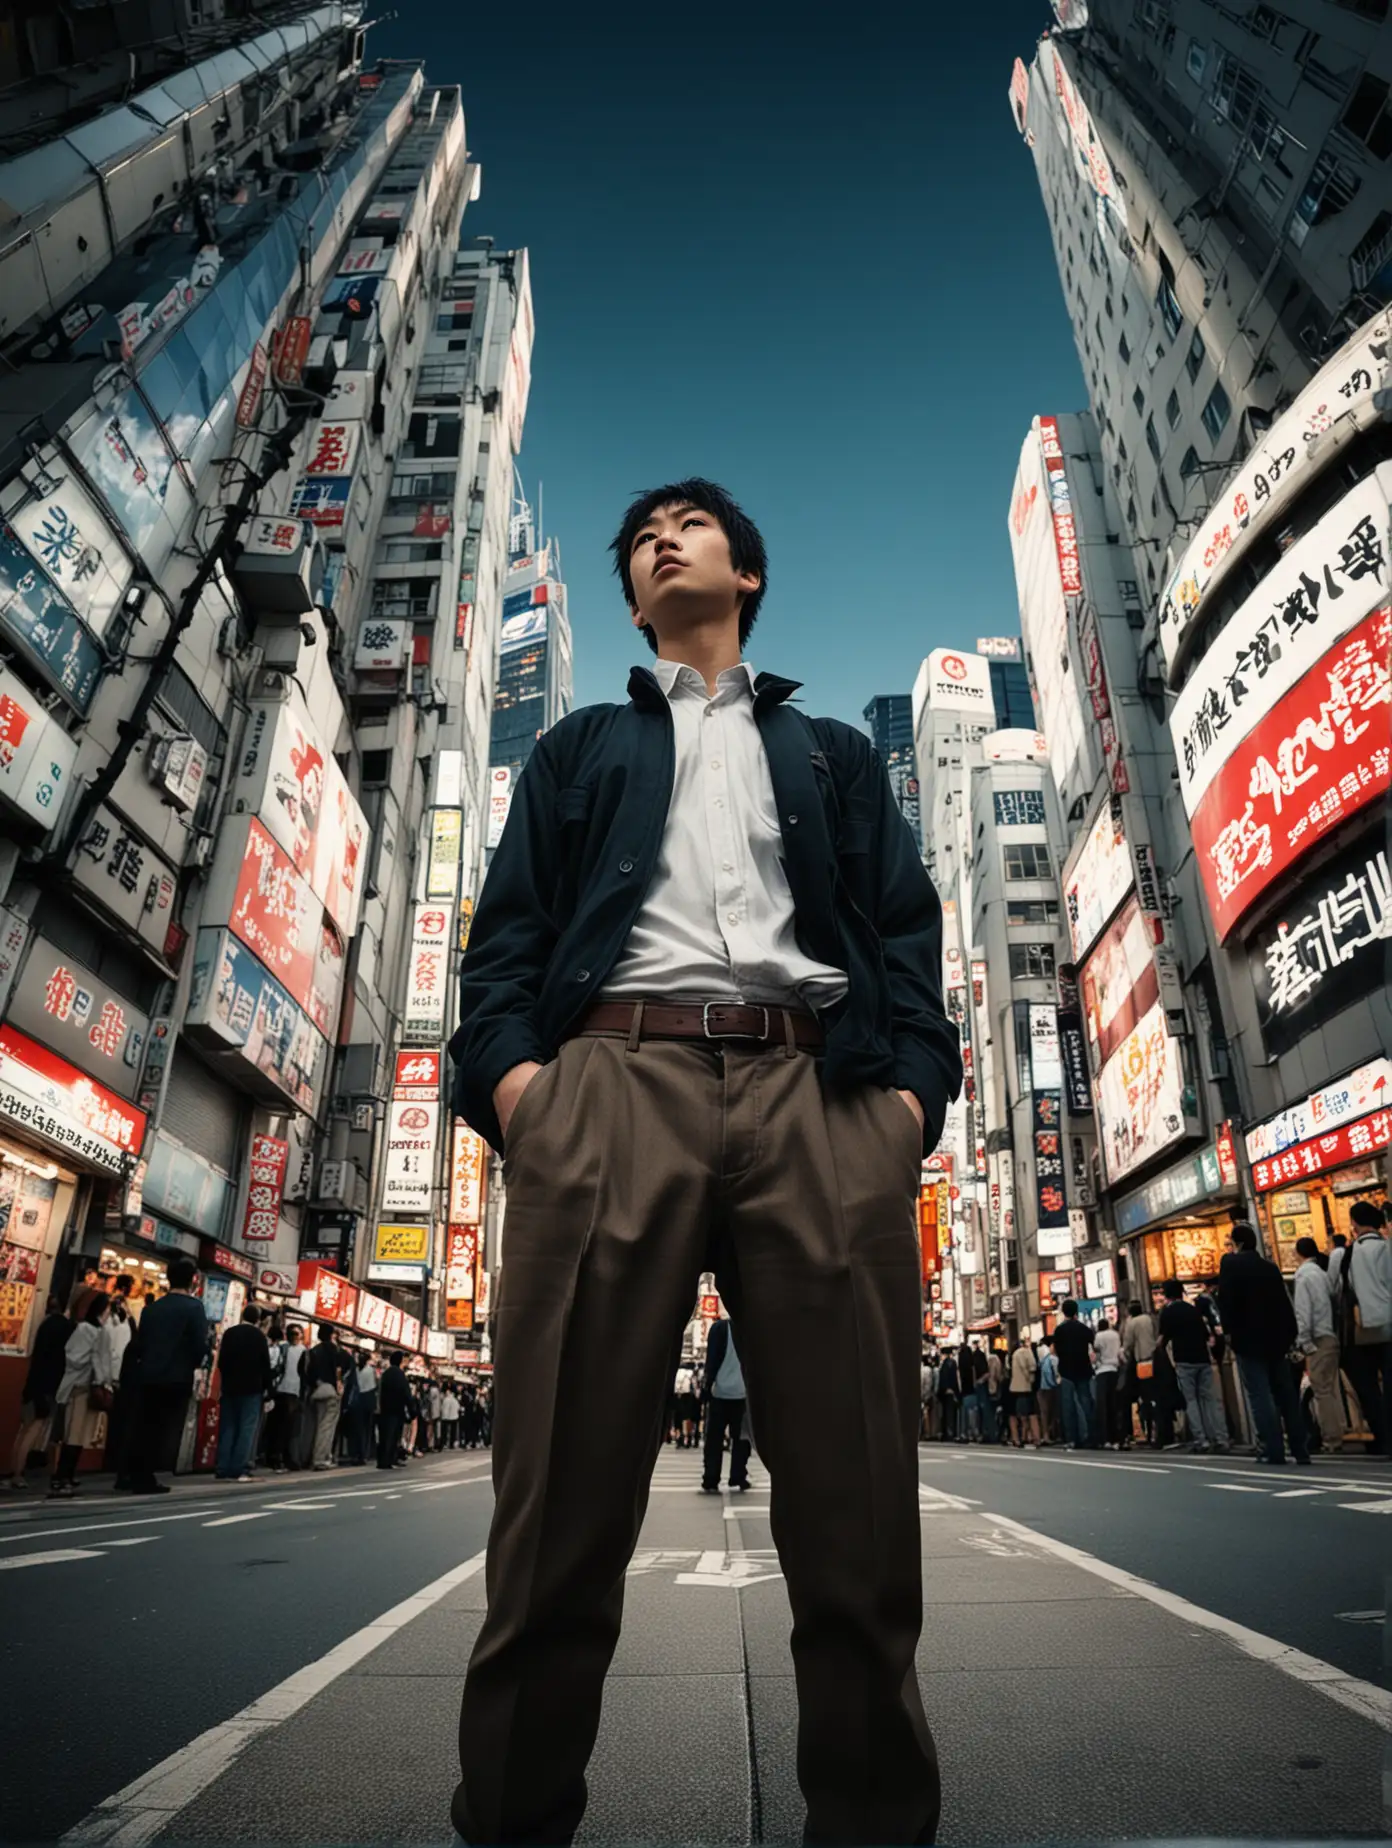 Visualize a captivating moment unfolding in the vibrant streets of Akihabara, where a young man stands confidently, his hands casually tucked into his pockets as he gazes directly towards the camera. Capture the scene from a very low-angle viewpoint, with the towering buildings towering overhead. Employ a fish-eye effect lens to distort the surroundings, amplifying the energy of the bustling streets and emphasizing the charismatic presence of the central figure.